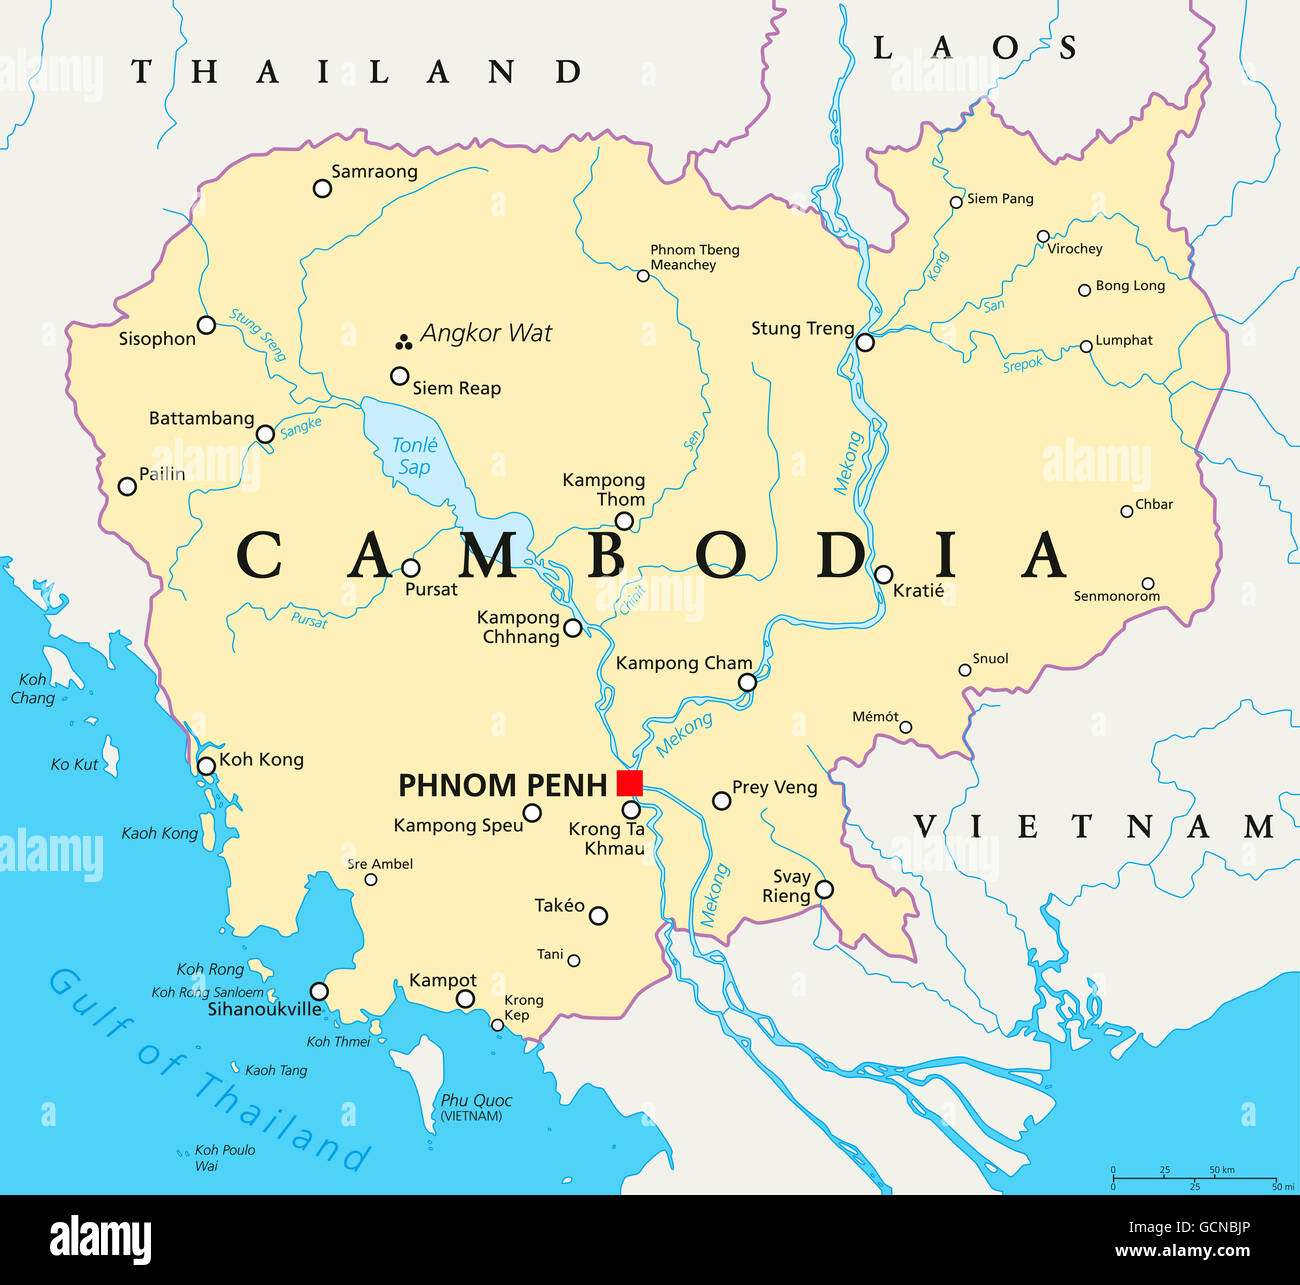 Cambodia political map with capital Phnom Penh, national borders, important cities, rivers and lakes. Kingdom in Indochina. Stock Photo